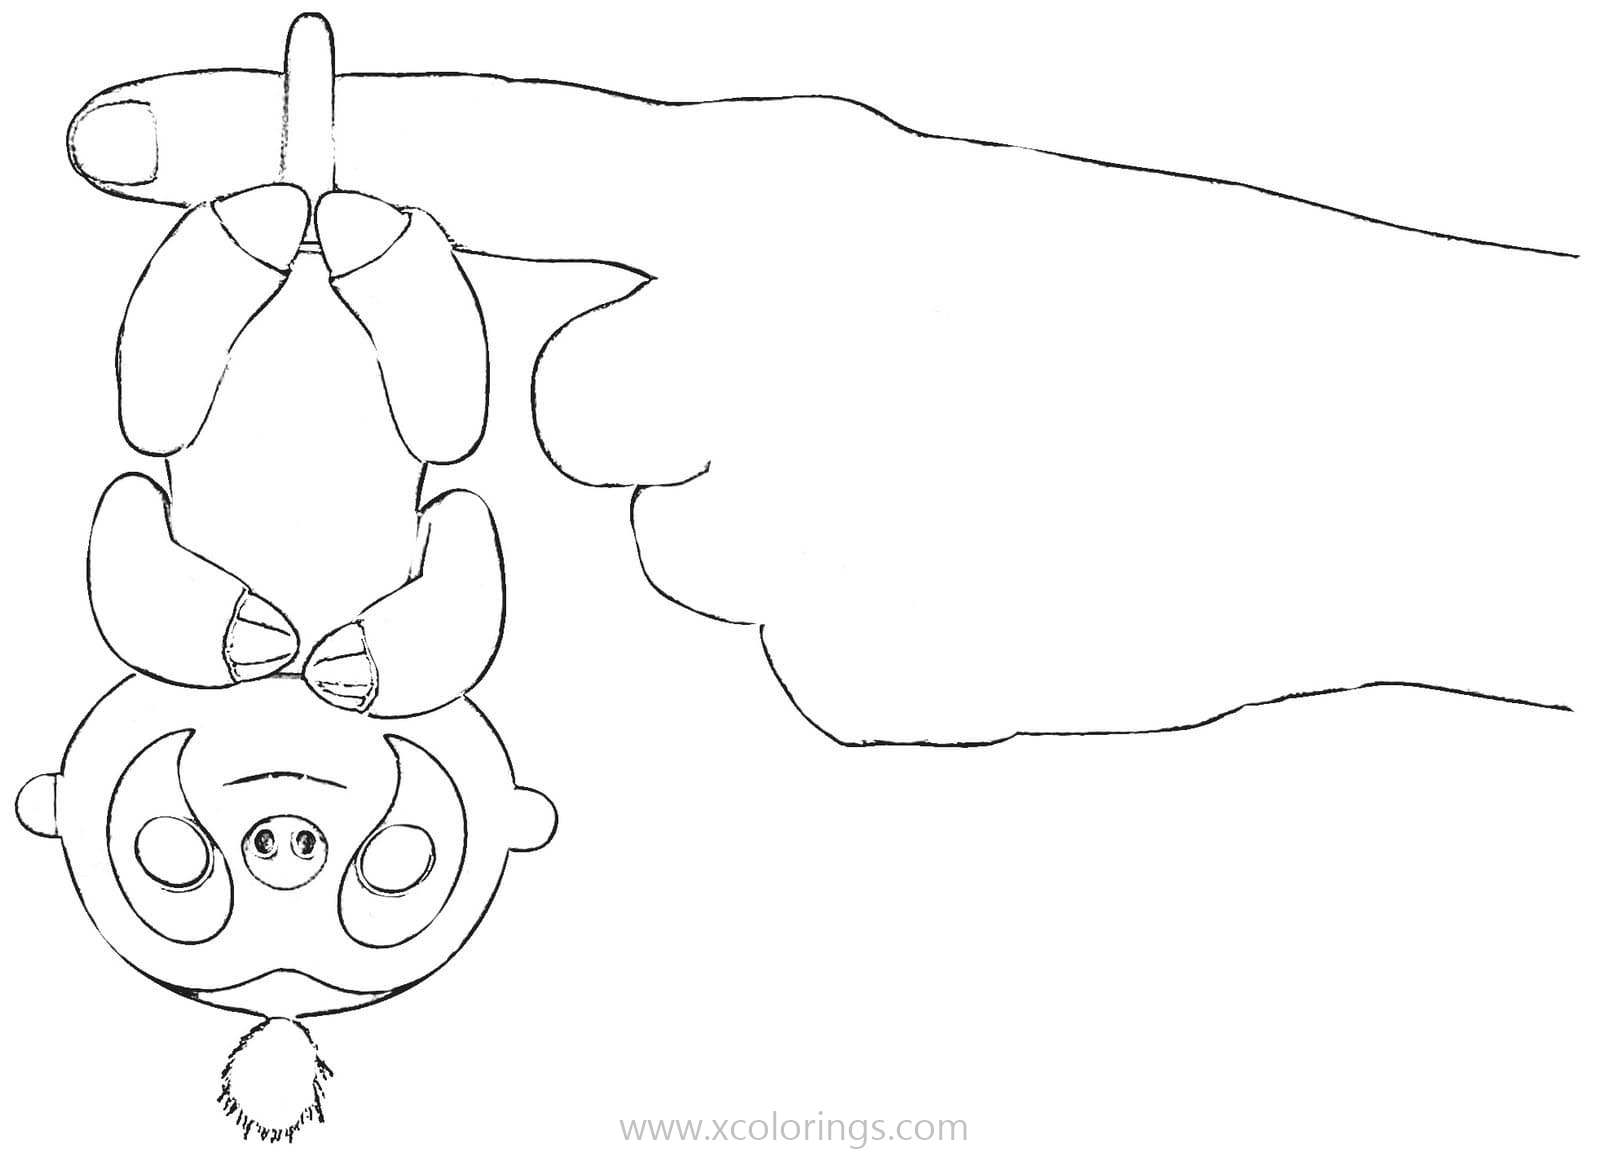 Free Fingerlings on Finger Coloring Pages printable